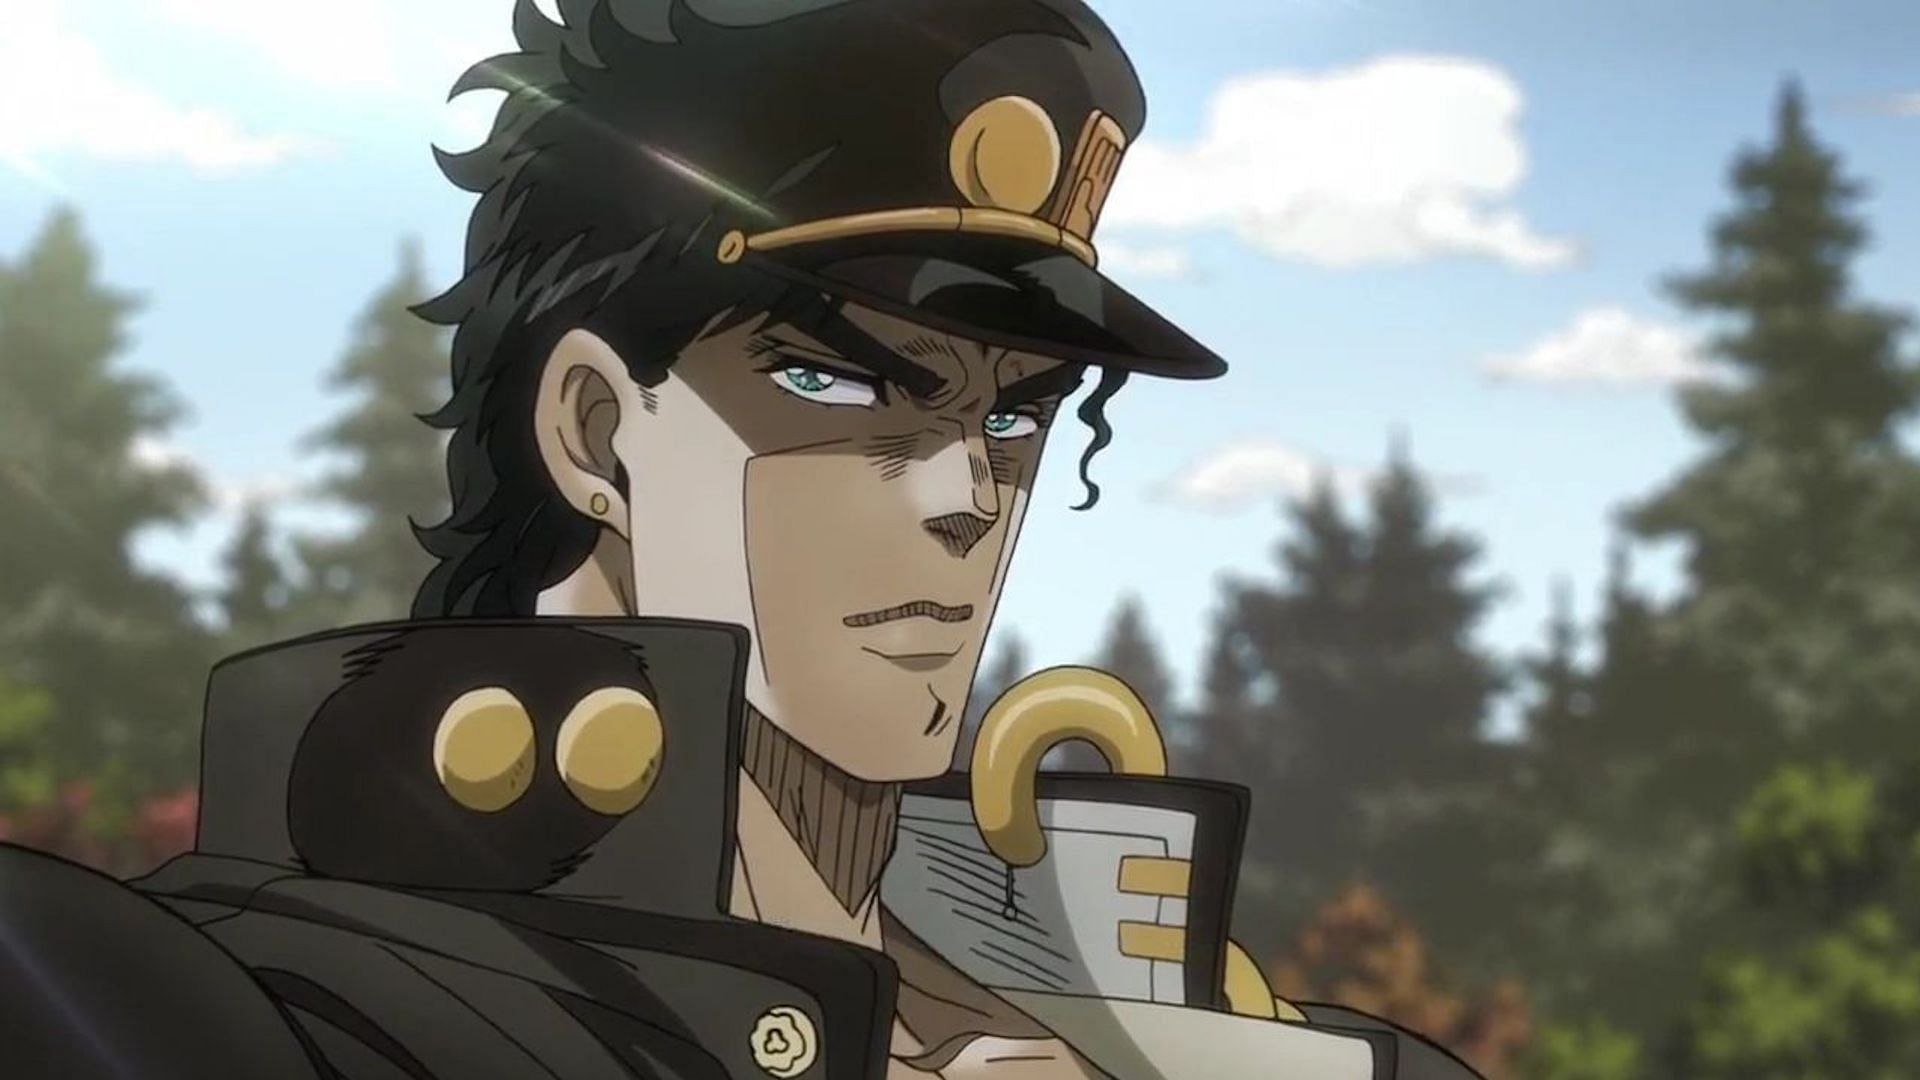 Fire Emblem Characters with Stardust Crusaders Cast (English VAs), Same Voice  Actor